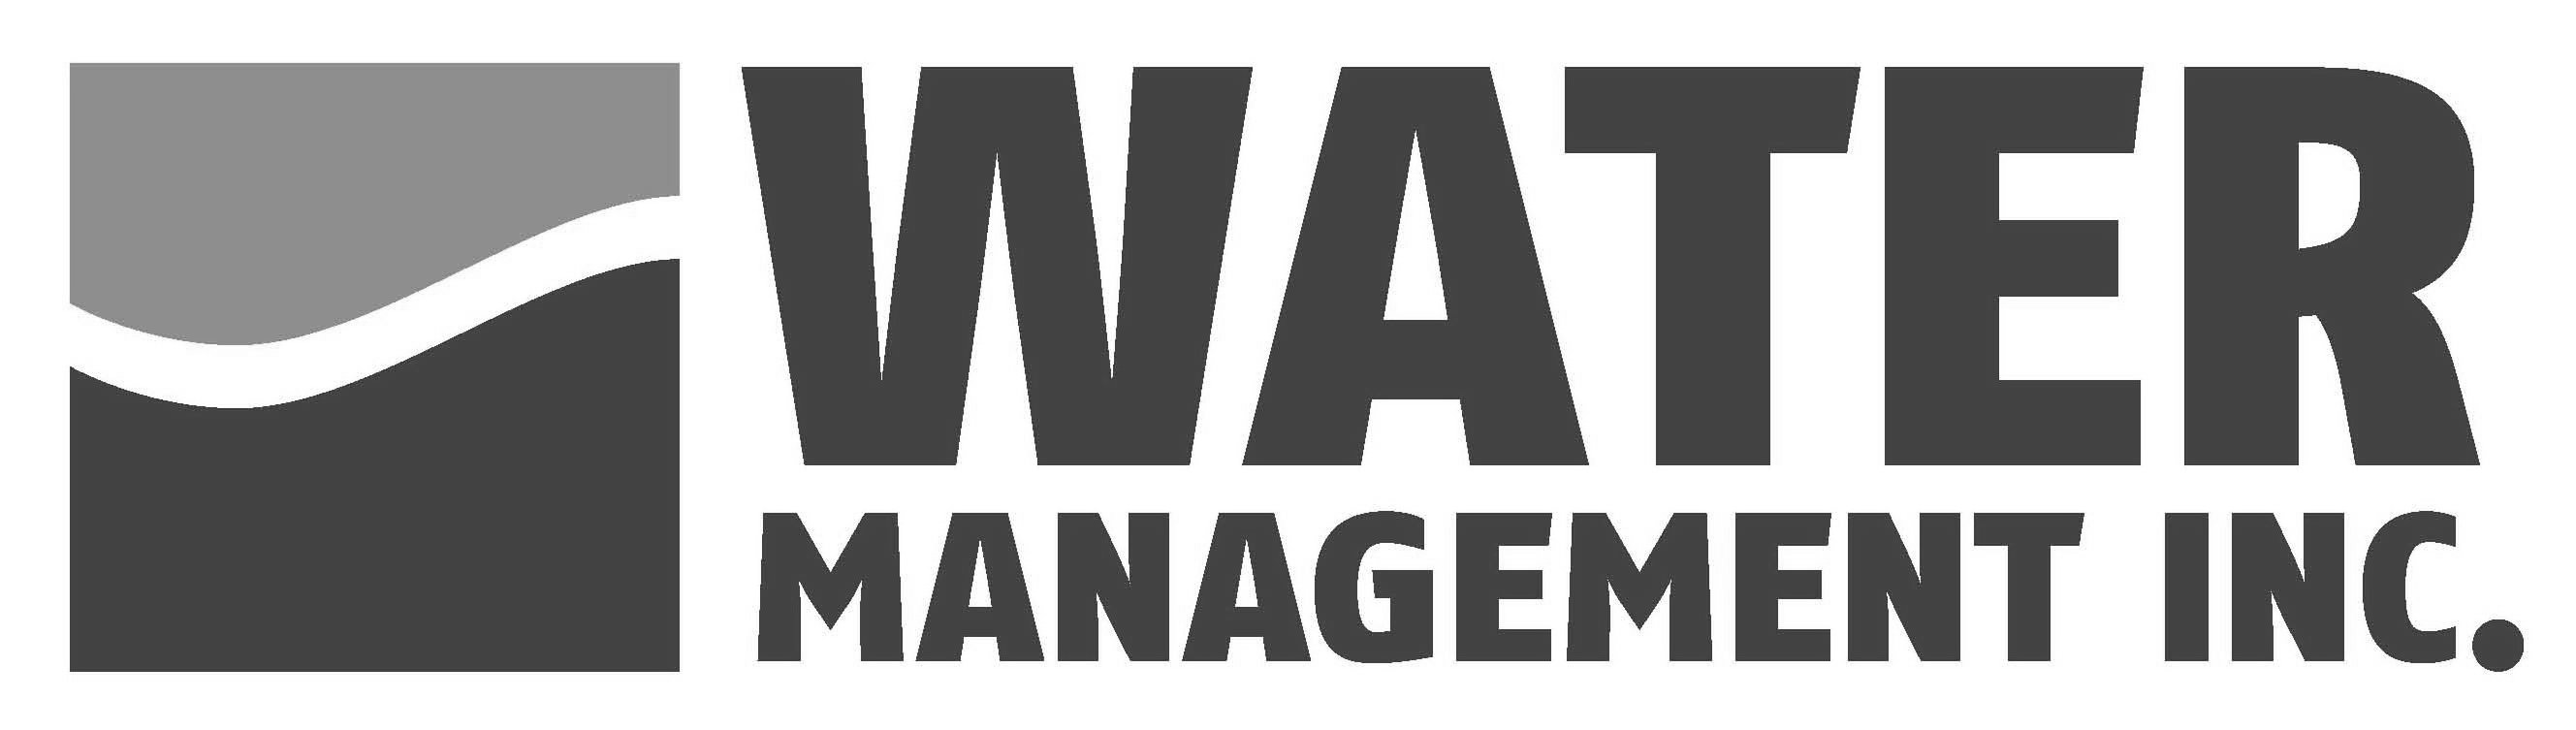  WATER MANAGEMENT INC.